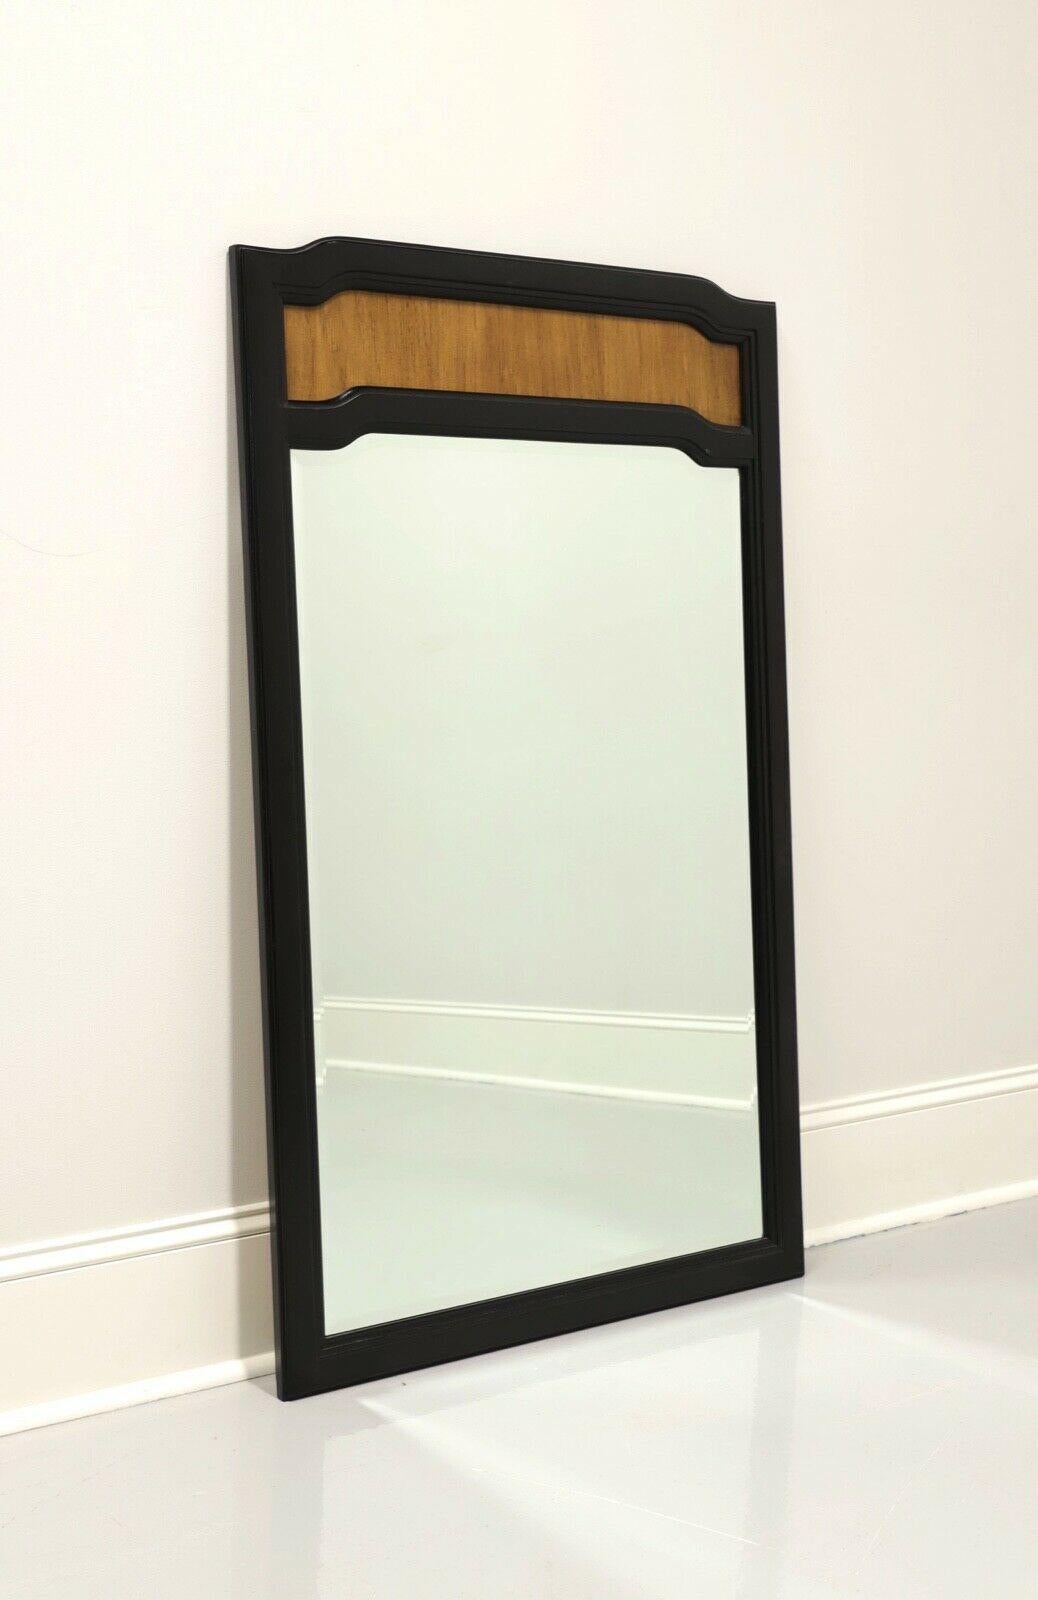 THOMASVILLE Embassy Asian Influenced Dresser / Wall Mirror For Sale 1